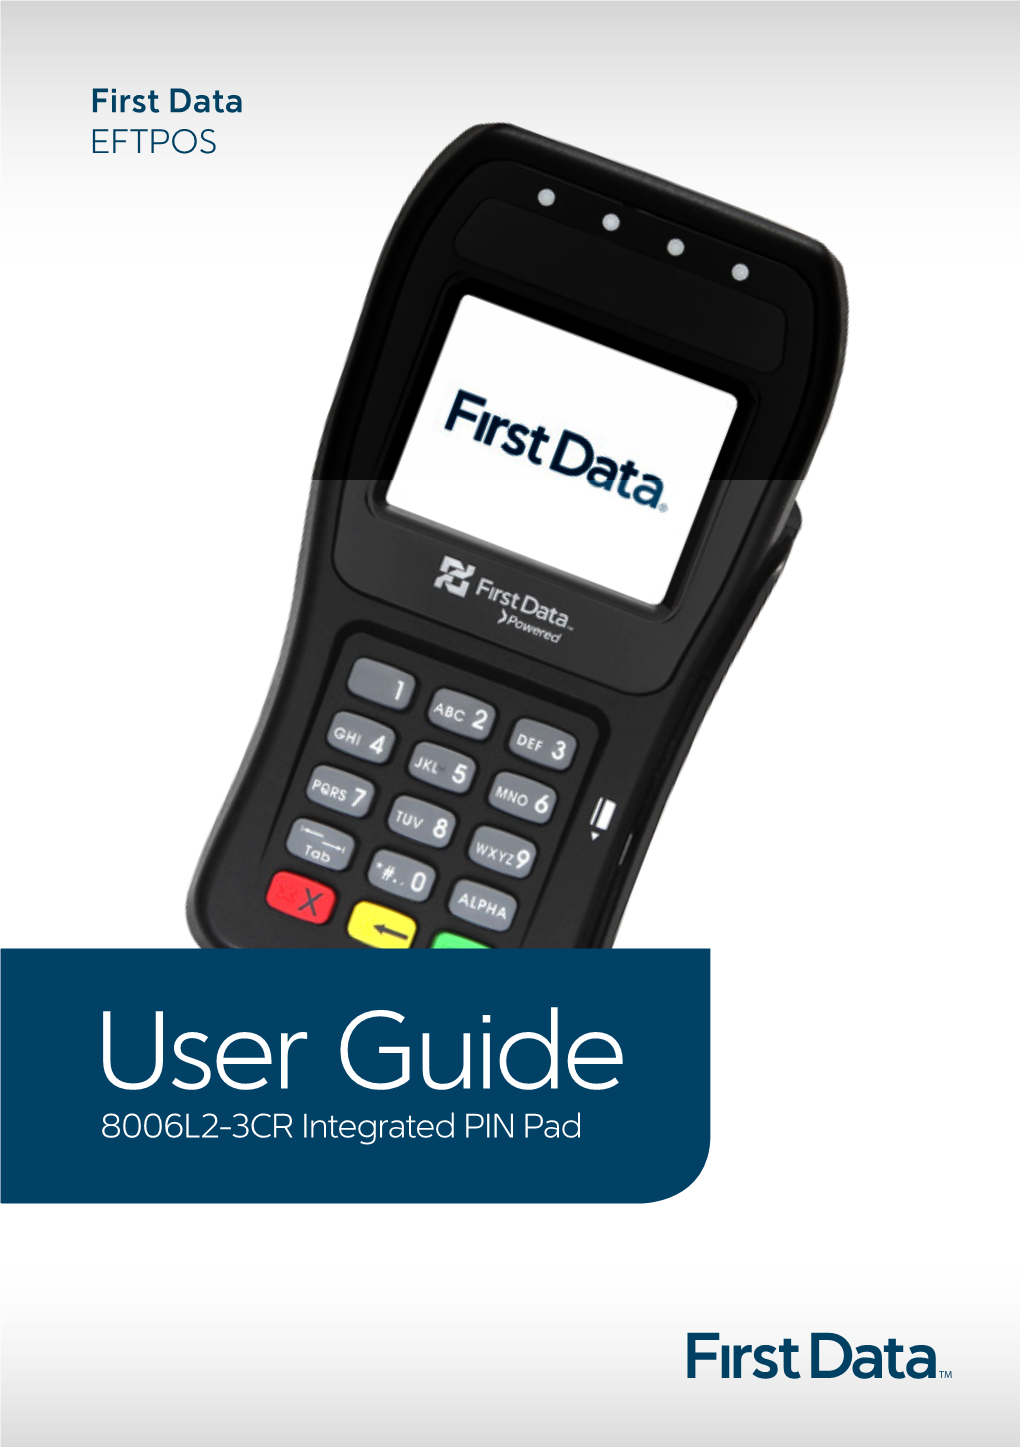 User Guide 8006L2-3CR Integrated PIN Pad 2 Contents